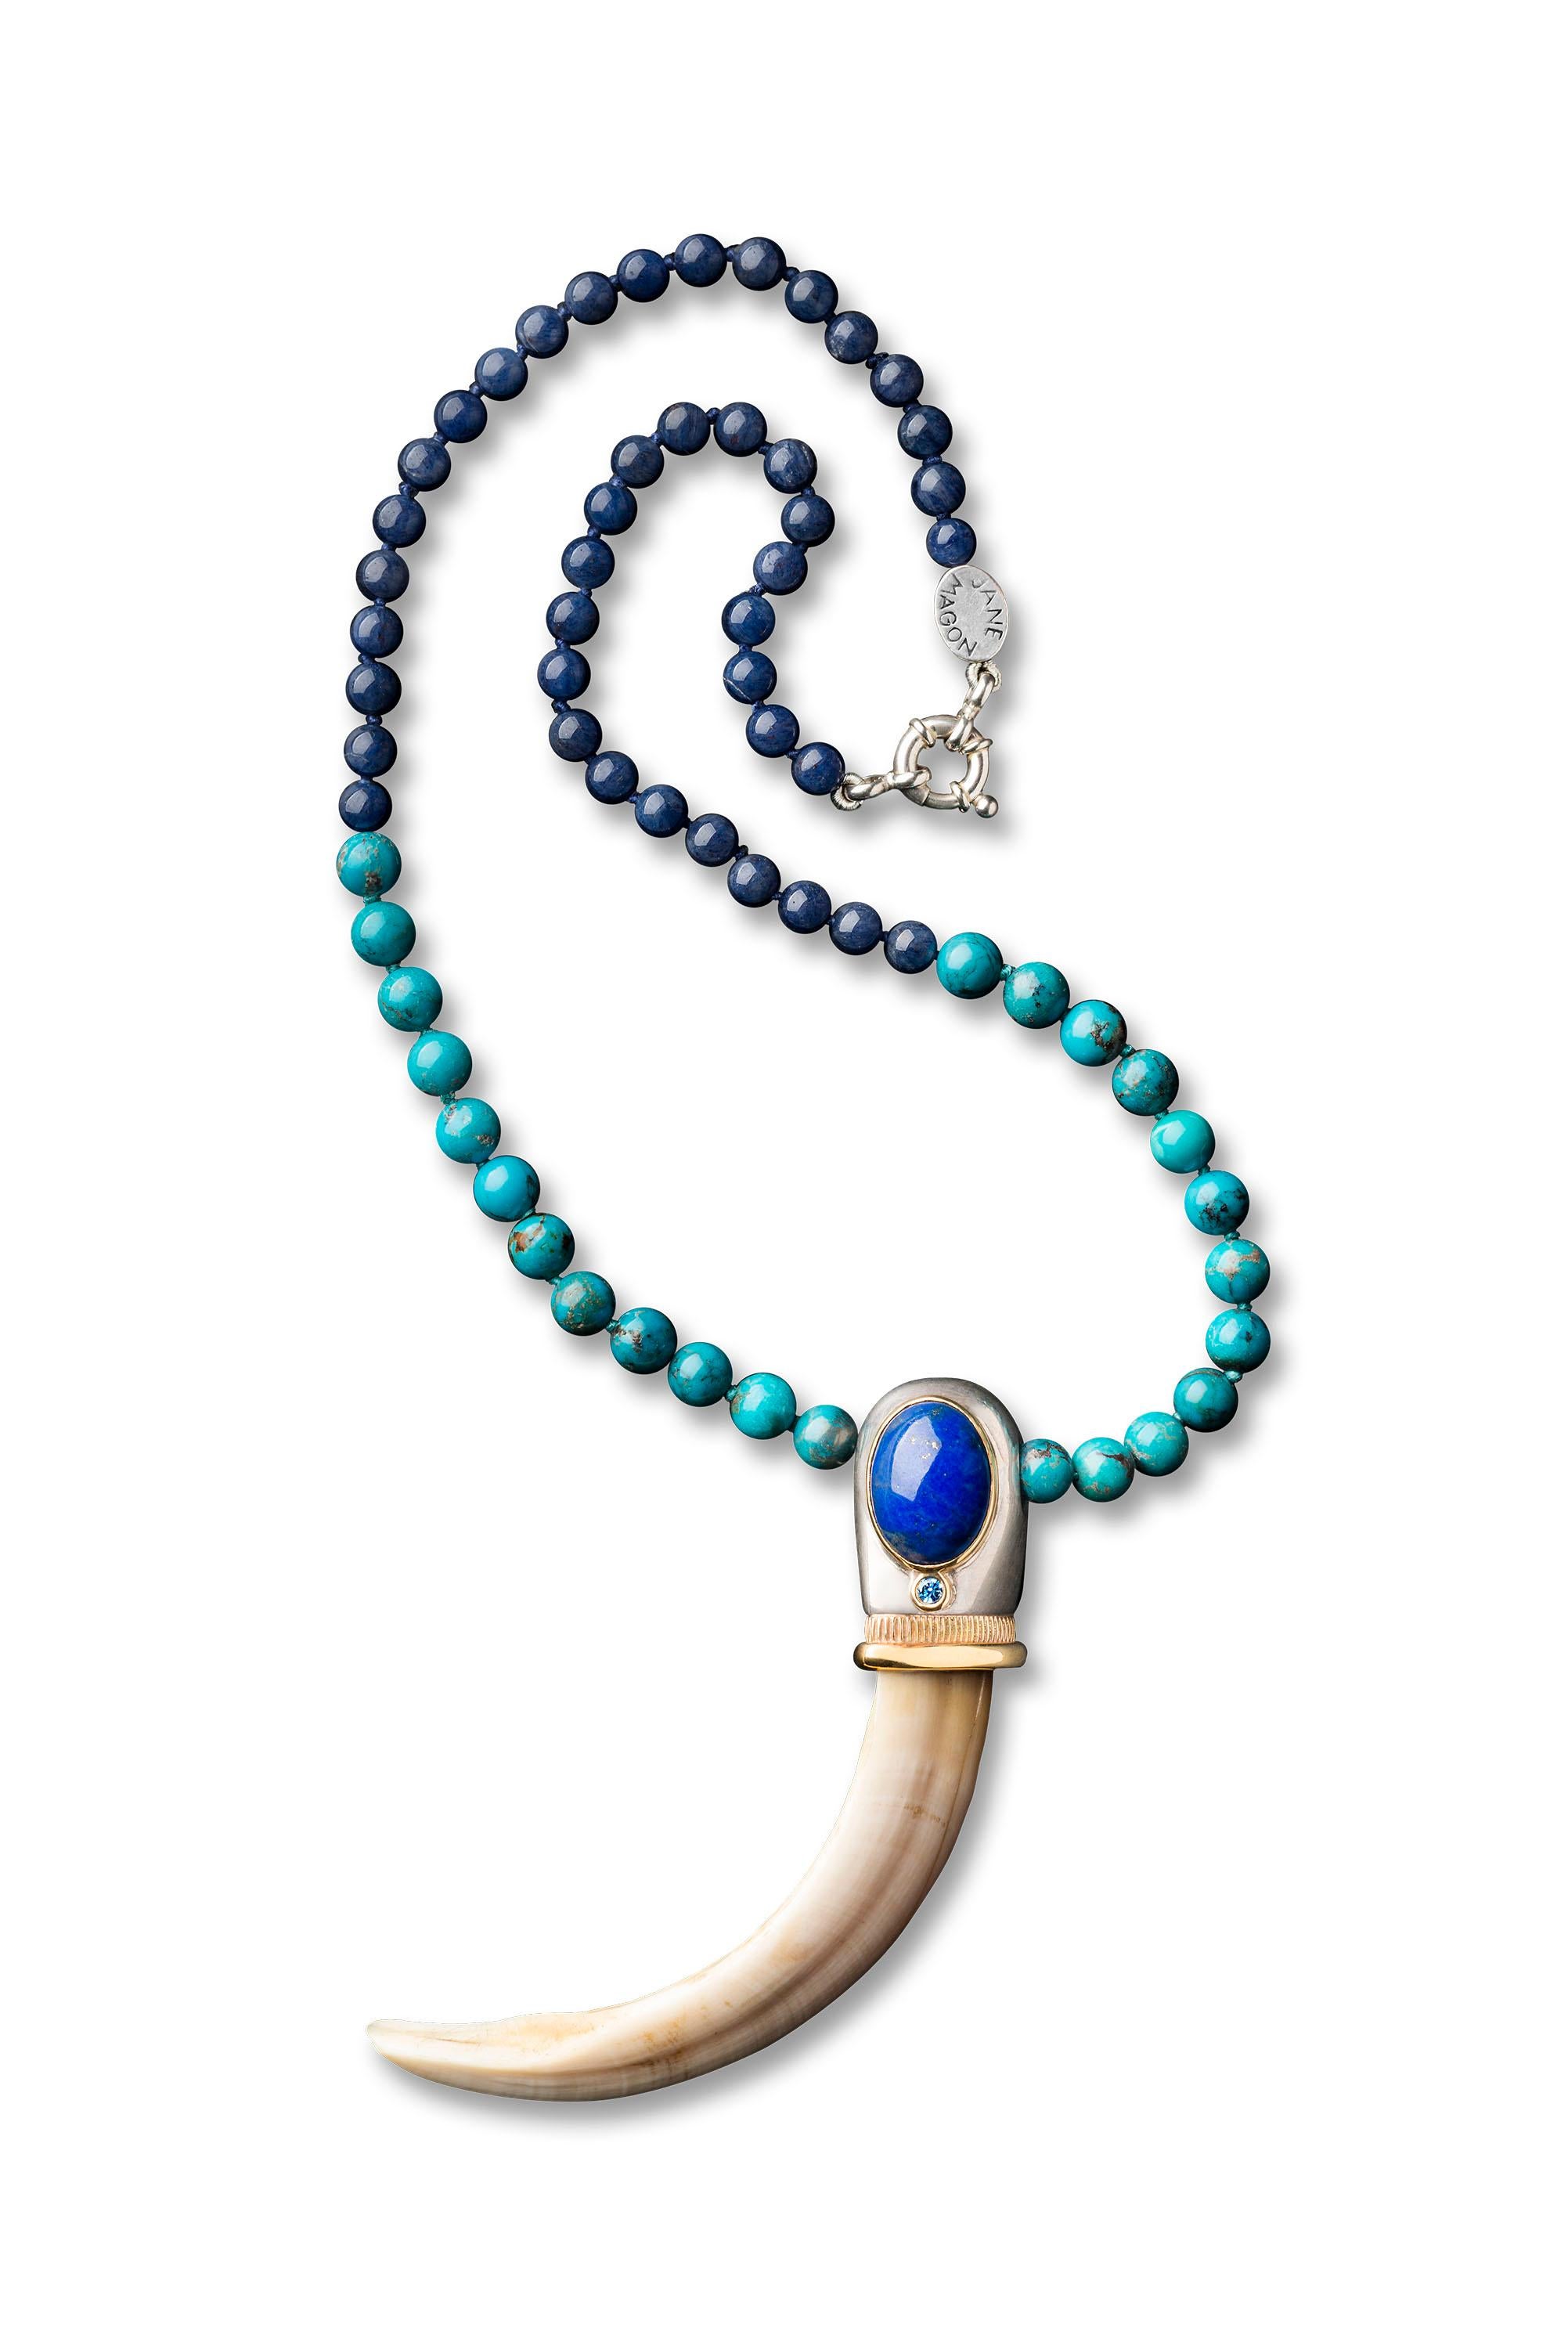 Jane Magon Collections Warrior Woman Tush Necklace has a Razorback Boar Tusk with a 9kt Yellow Gold Bezel setting holding it and a Round Blue Topaz and a large Cabochon Lapiz Lazuli Stone. Set on a Lapiz Lazuli bead and Turquoise Bead Necklace. Has